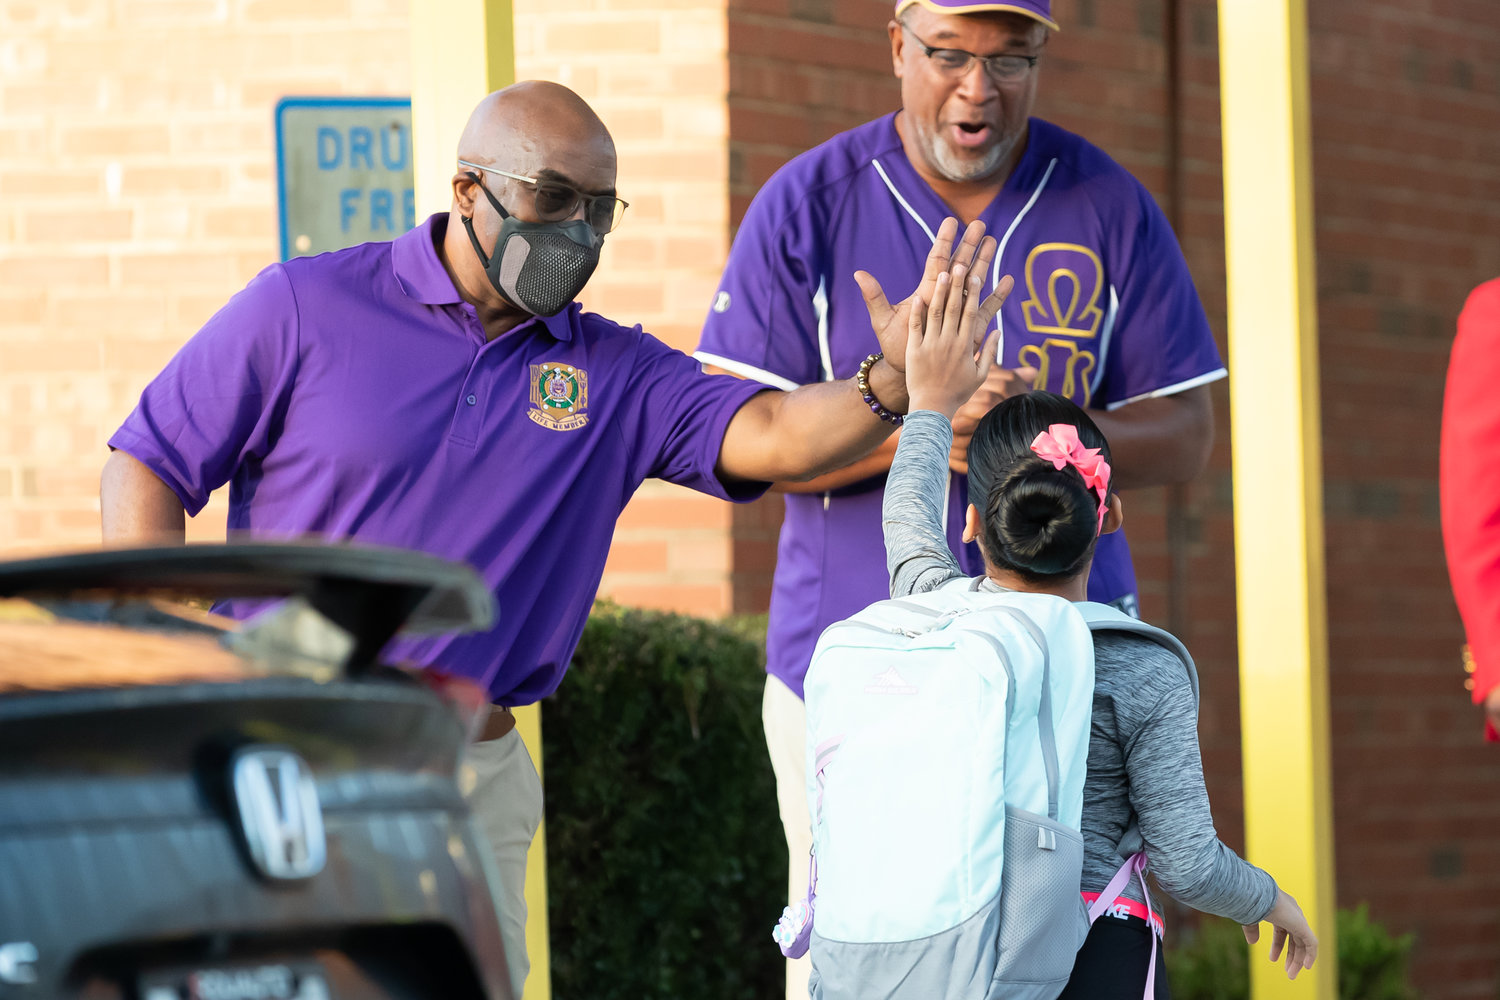 Members of the Omega Psi Phi Fraternity greet students as they arrive for the first day of school at Ferguson-Easley Elementary School on Monday.